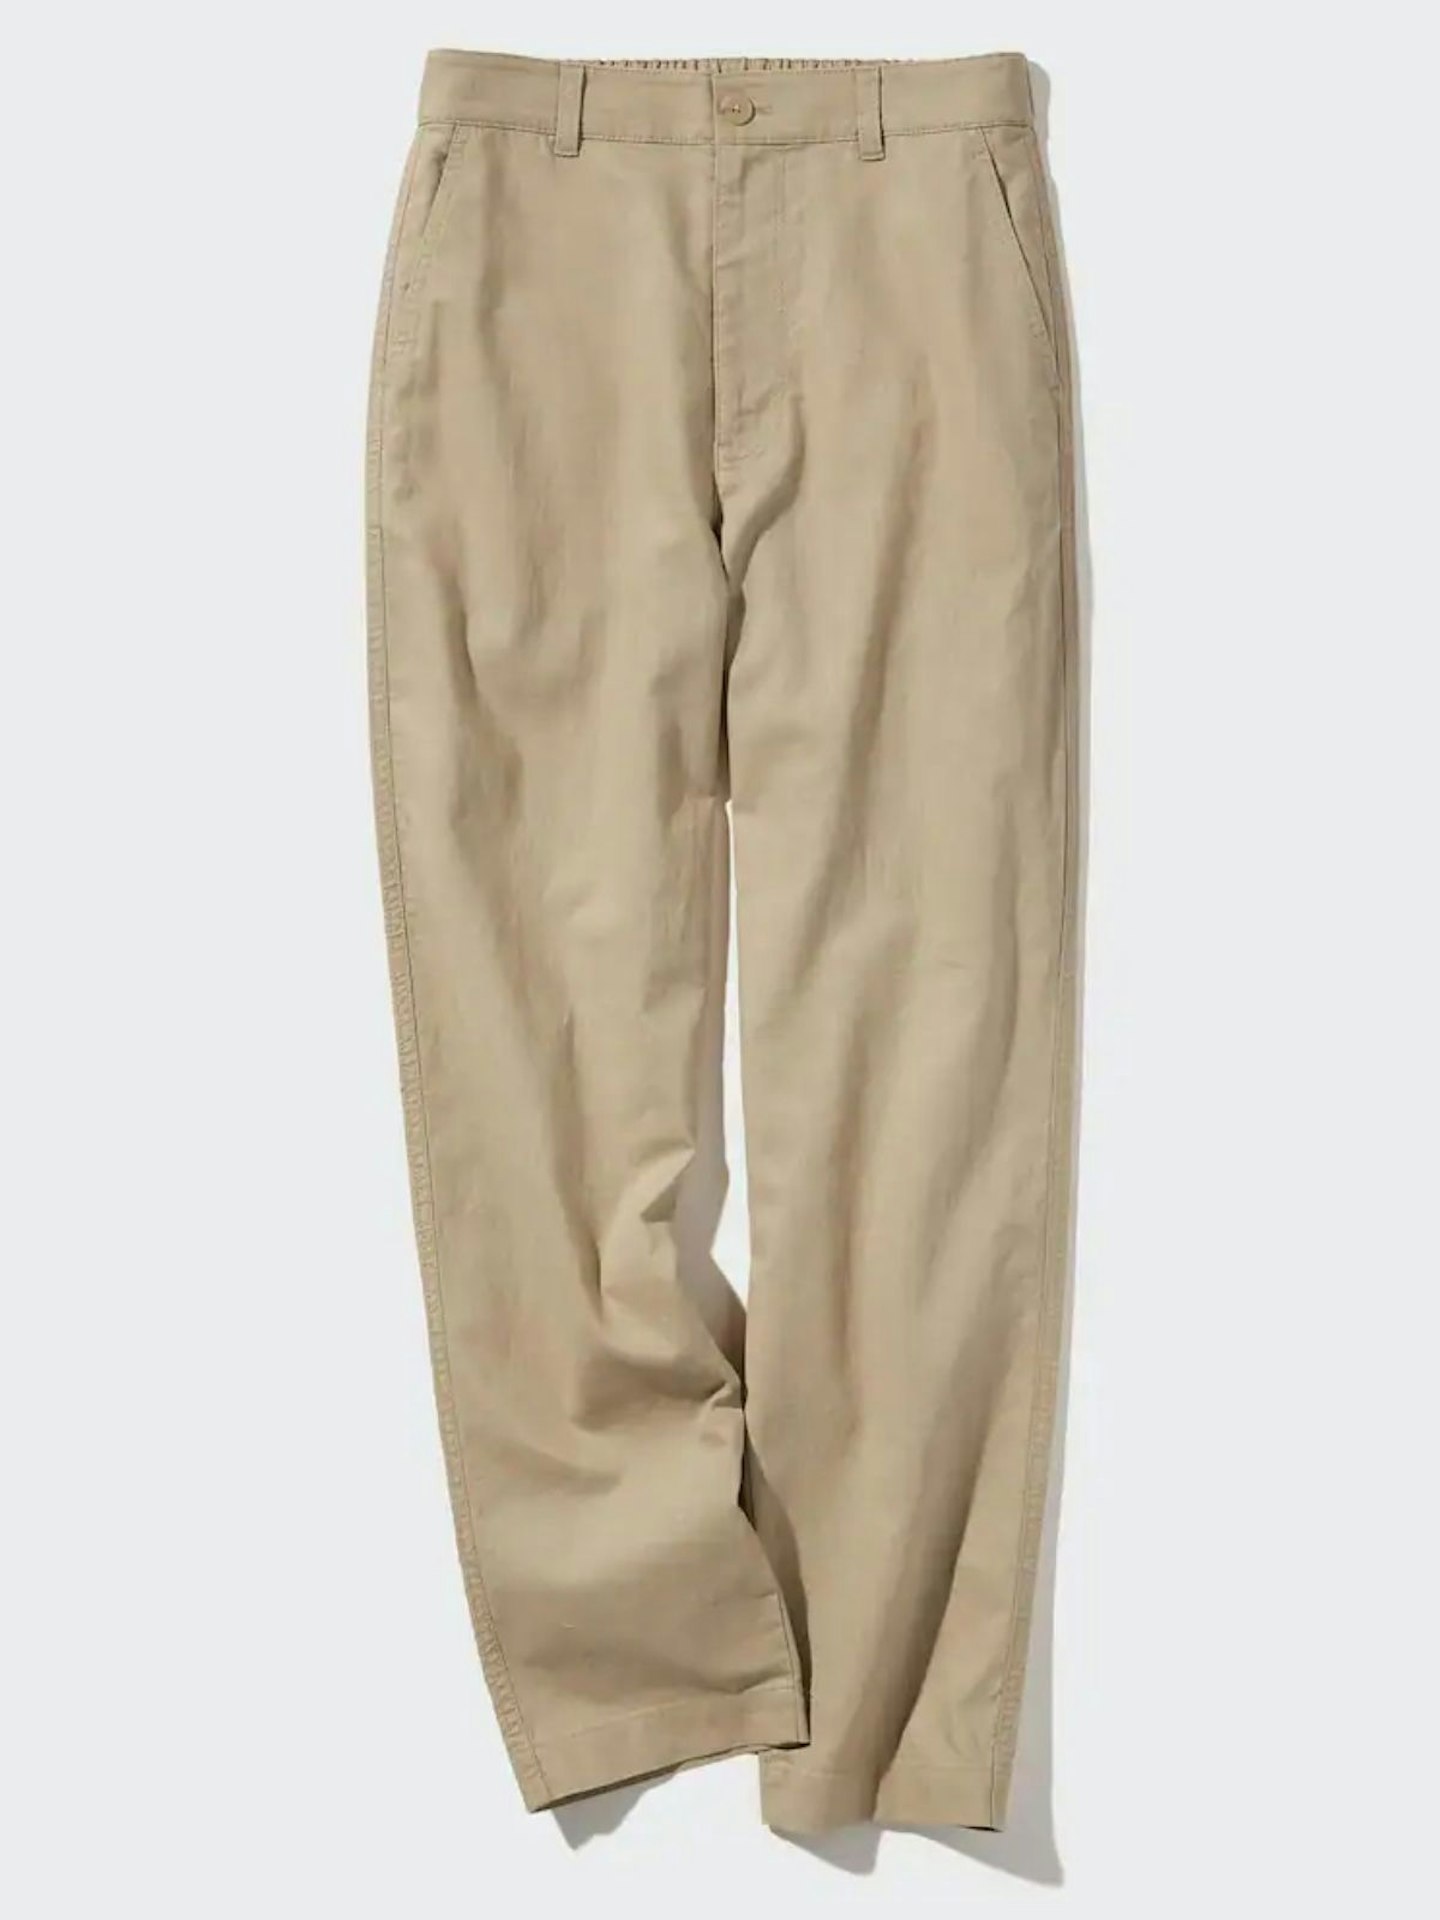 Uniqlo Linen Cotton Blend Tapered Trousers